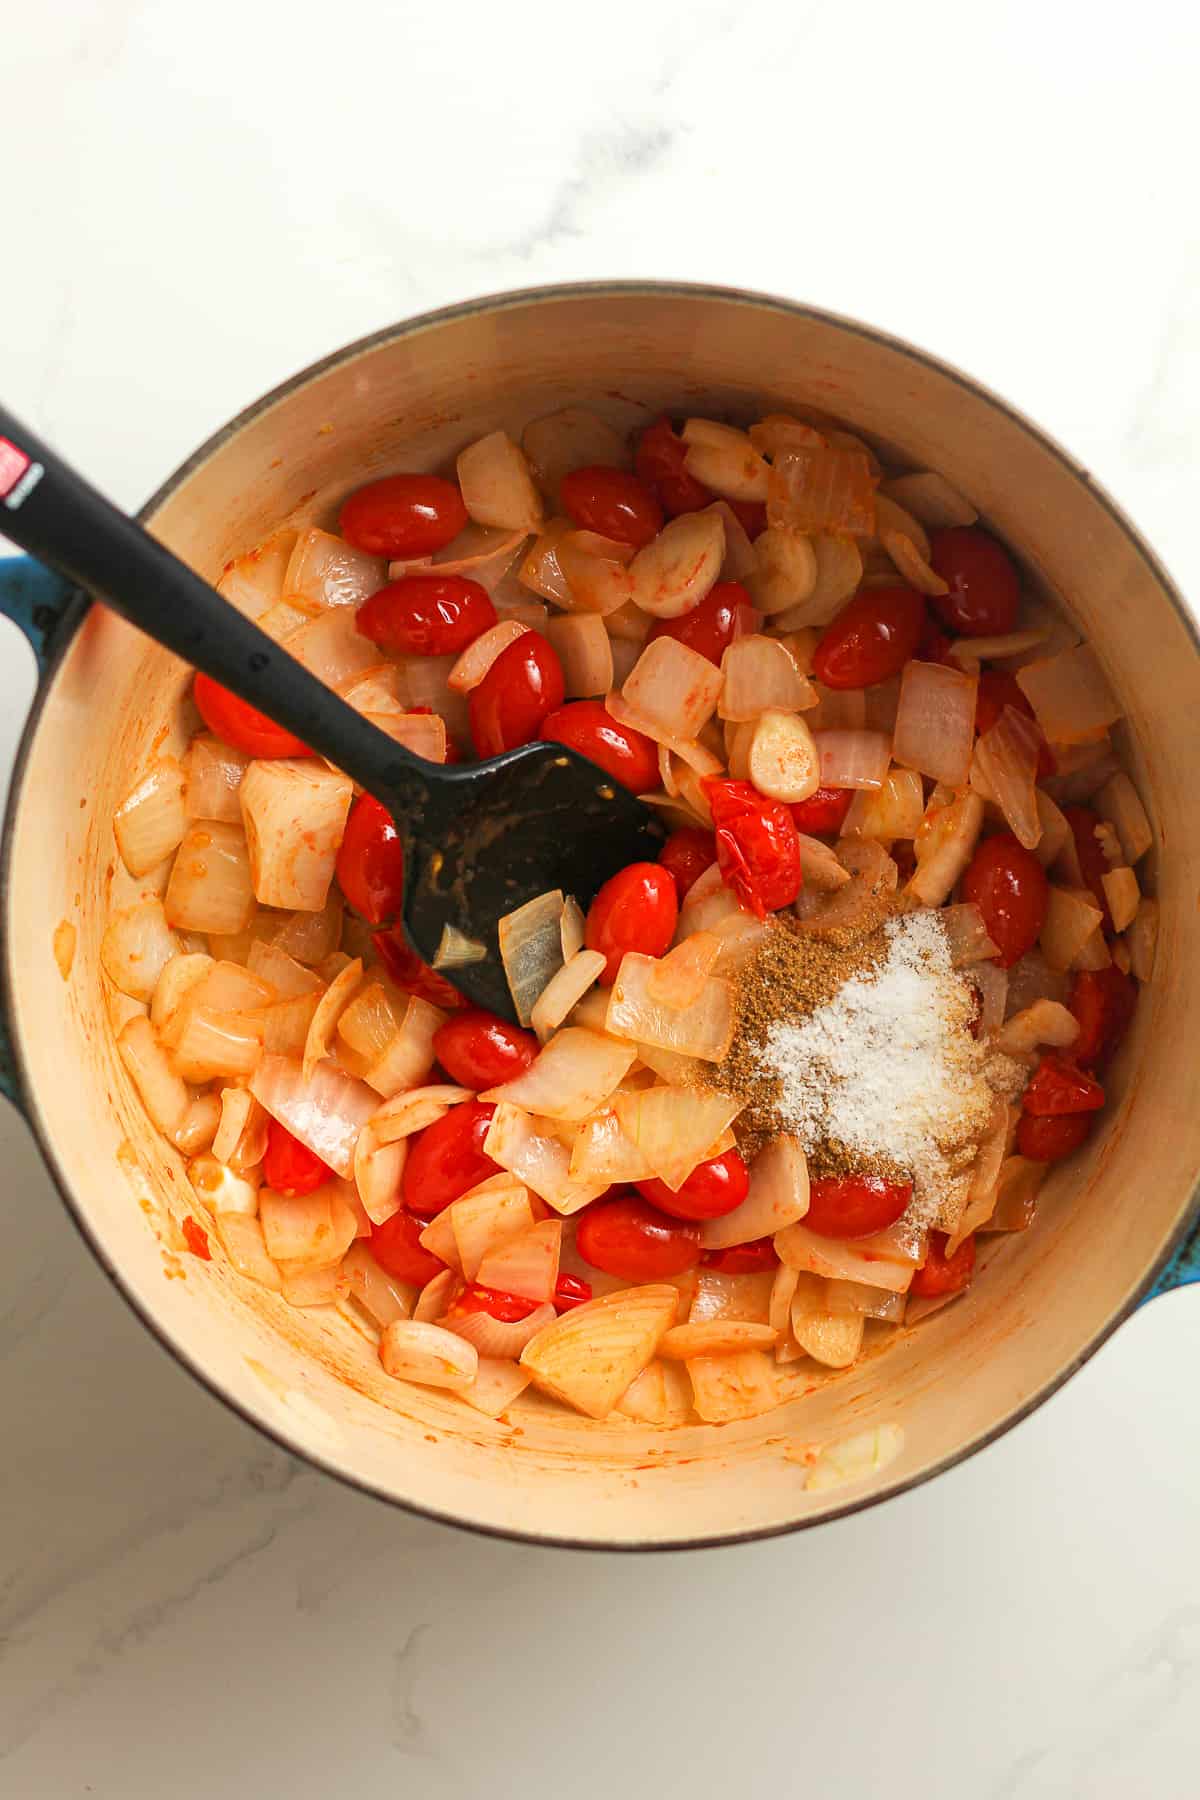 A pot of the cooked onions, tomatoes, garlic and the seasoning on top.